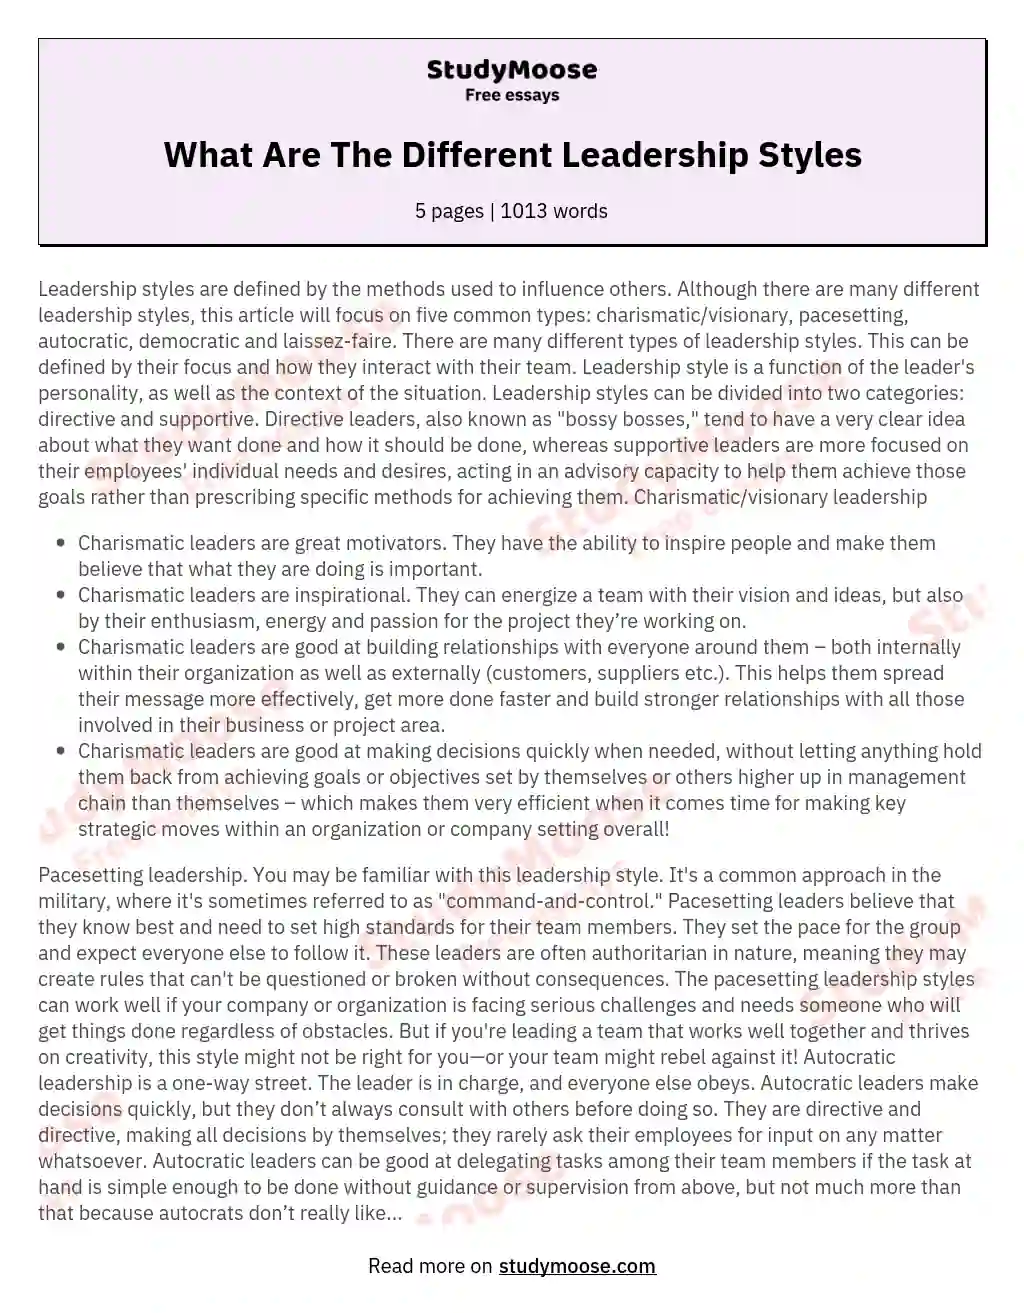 What Are The Different Leadership Styles essay